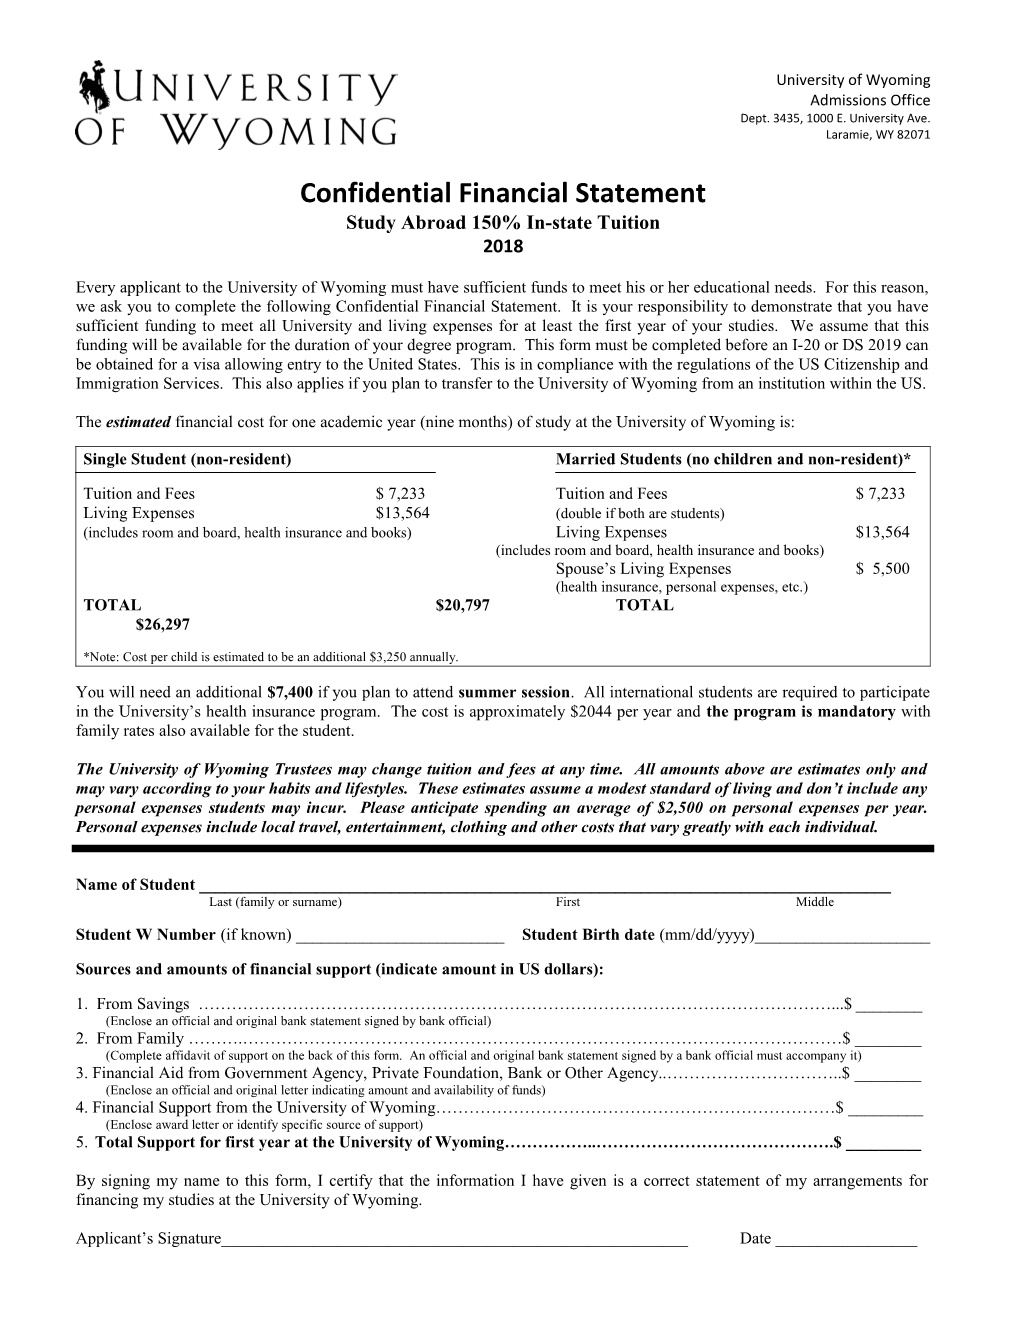 Confidential Financial Statement Study Abroad 150% In-State Tuition